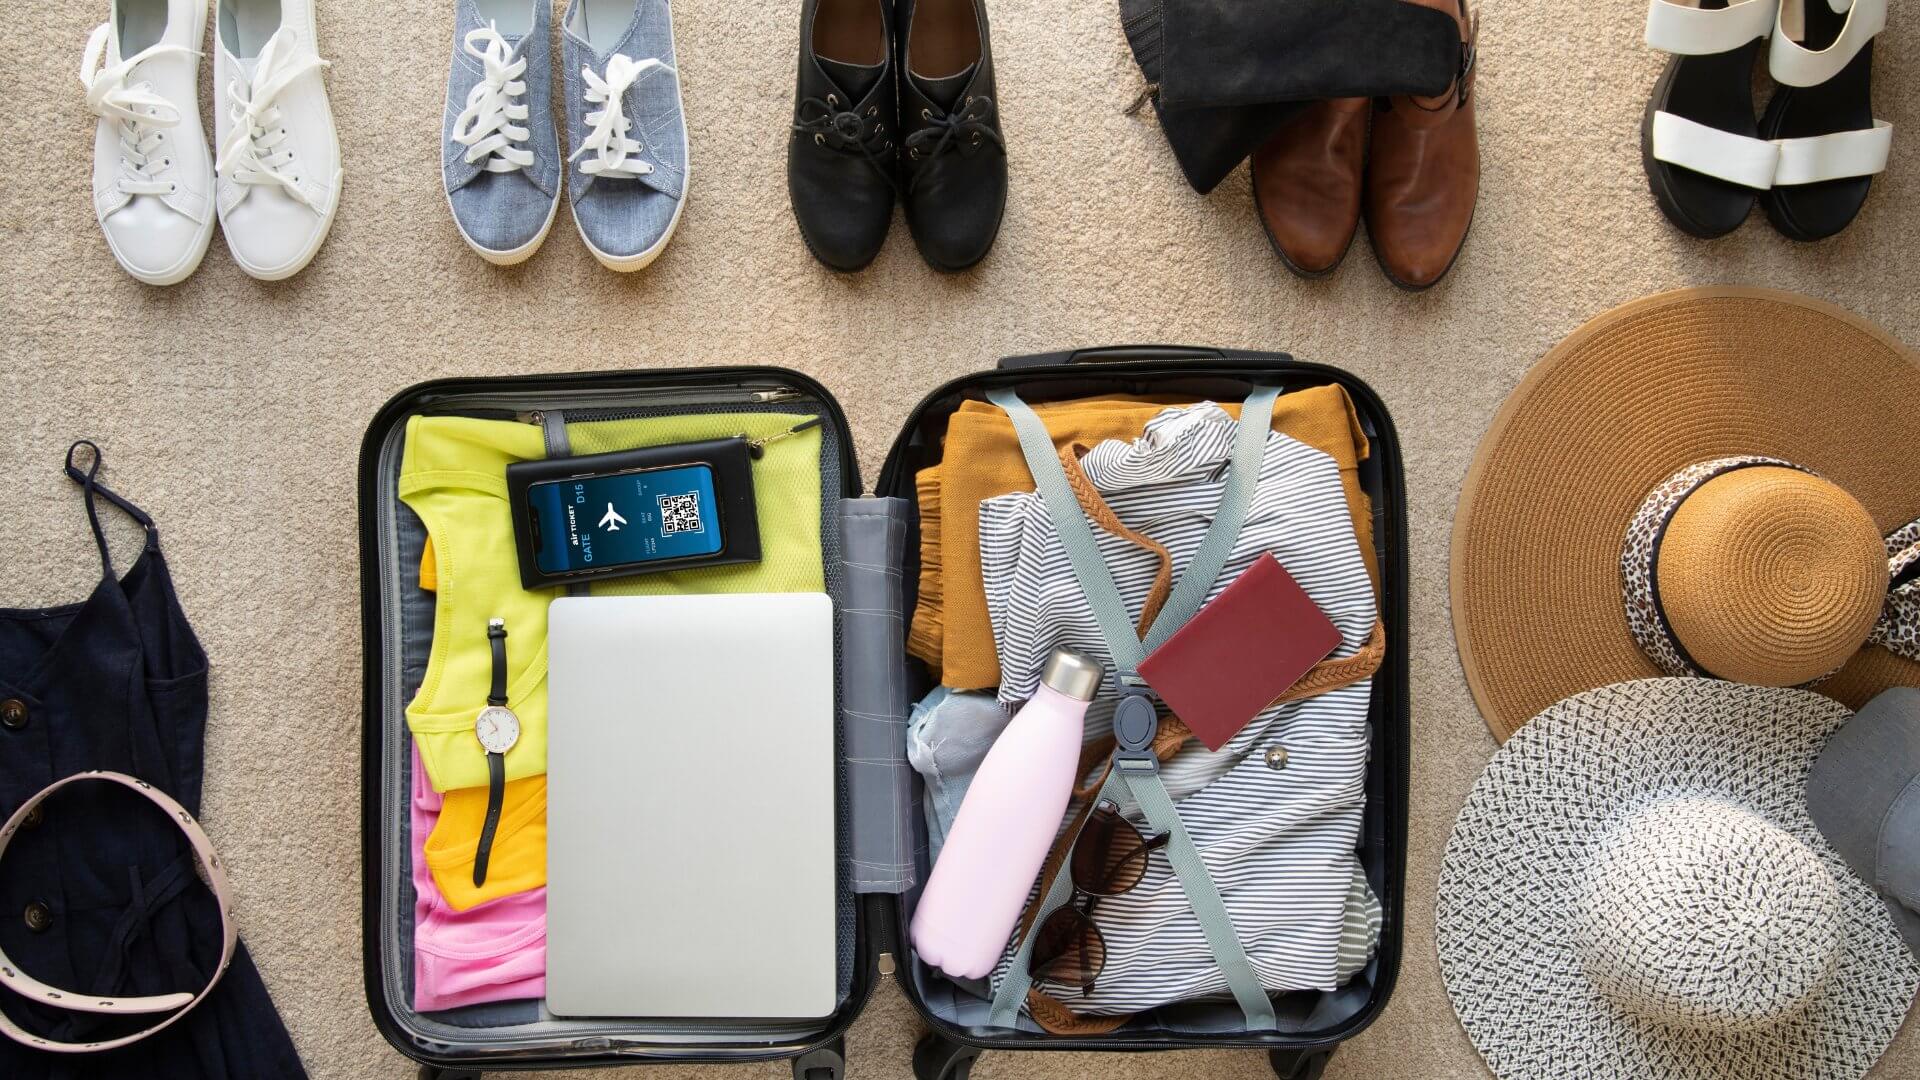 The hassle of packing a bag for a holiday, money, passports